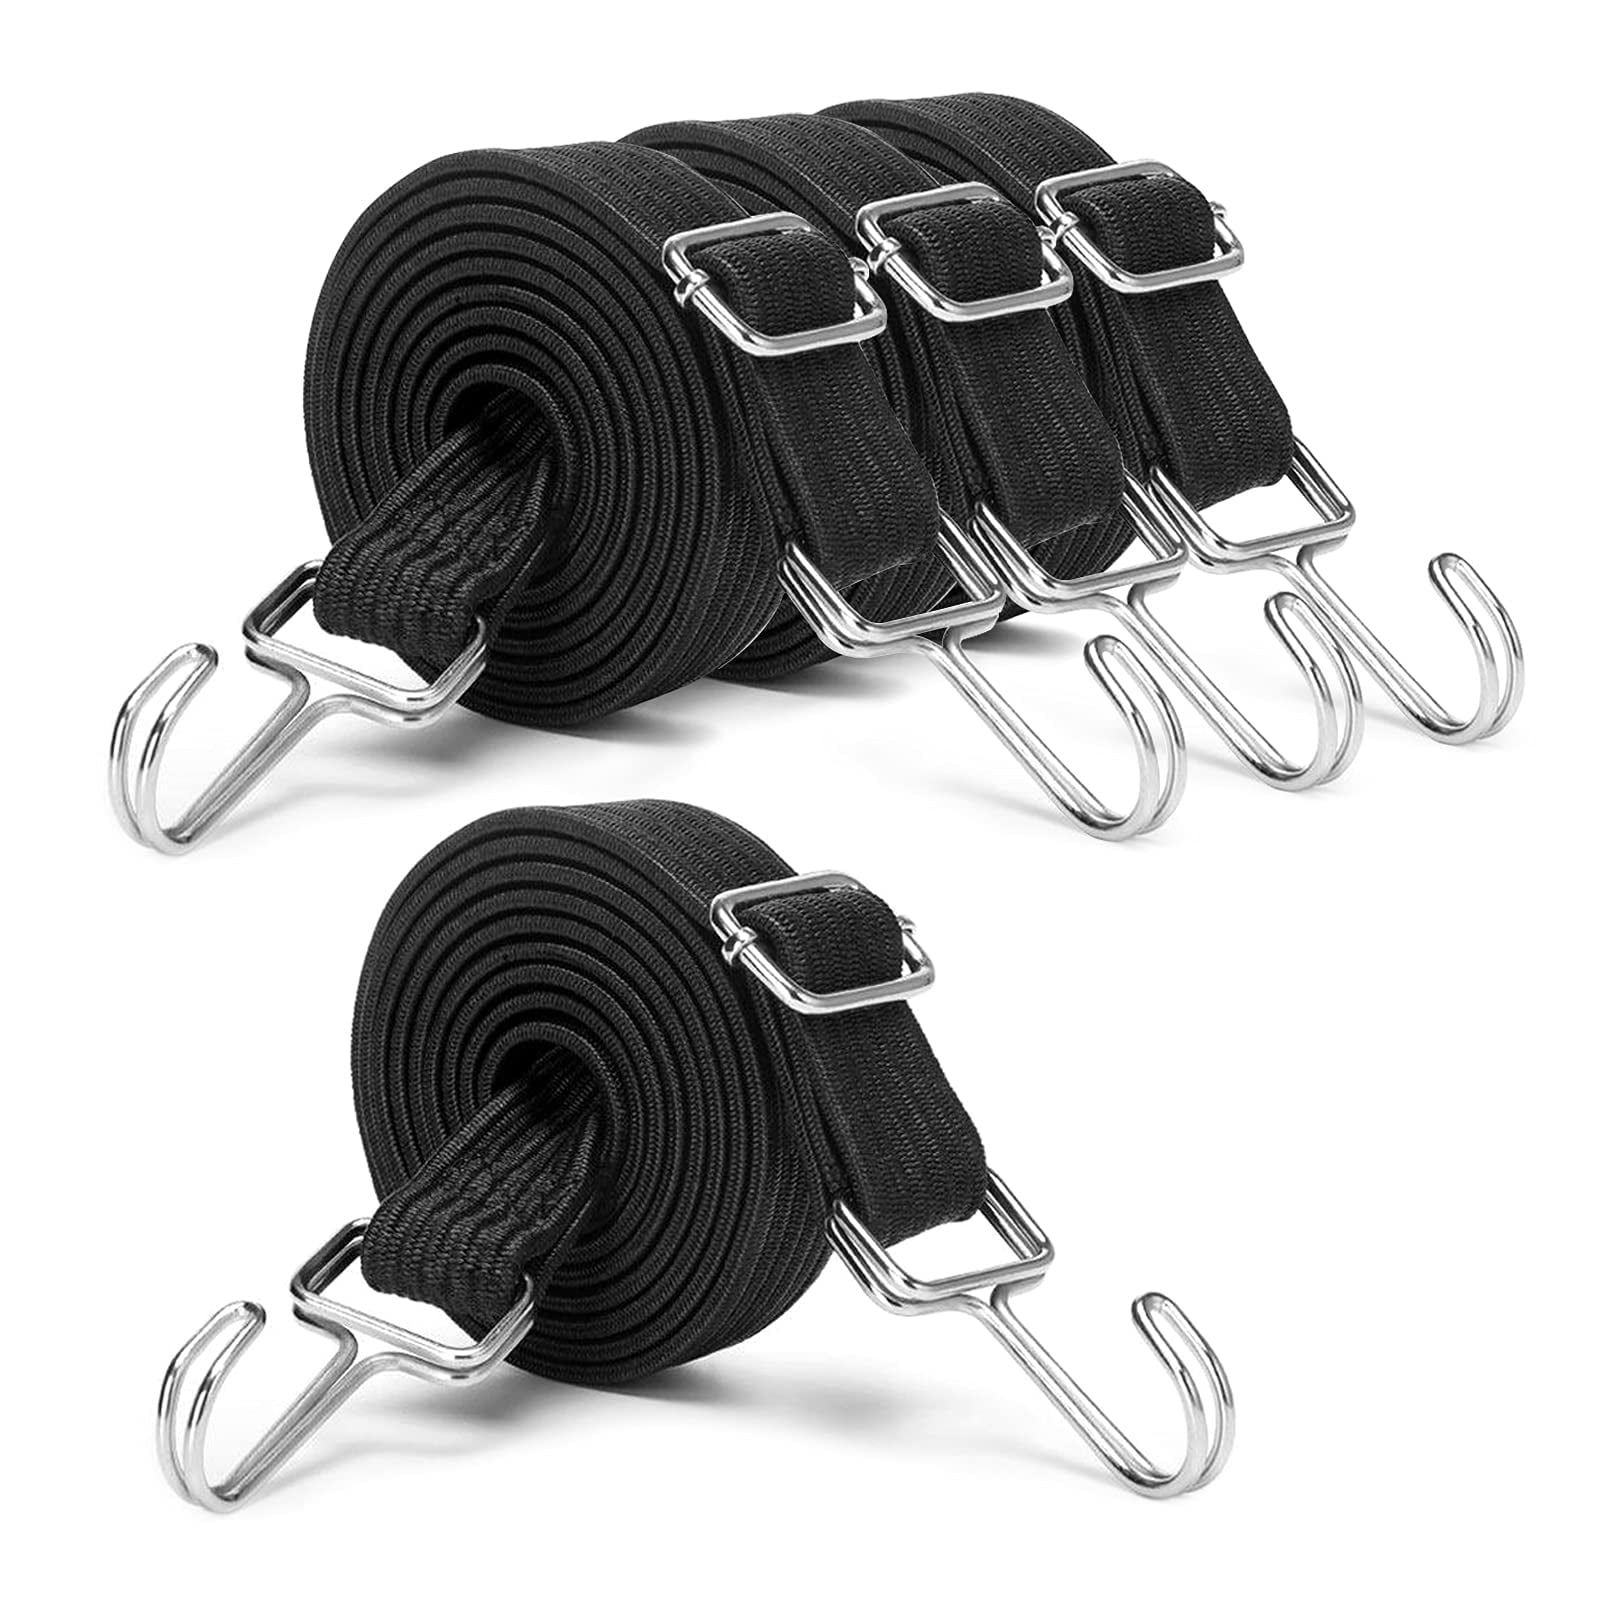 Bungee Cords With Hooks 1M/2M/3M Extra Long Bungee Strap Ropes